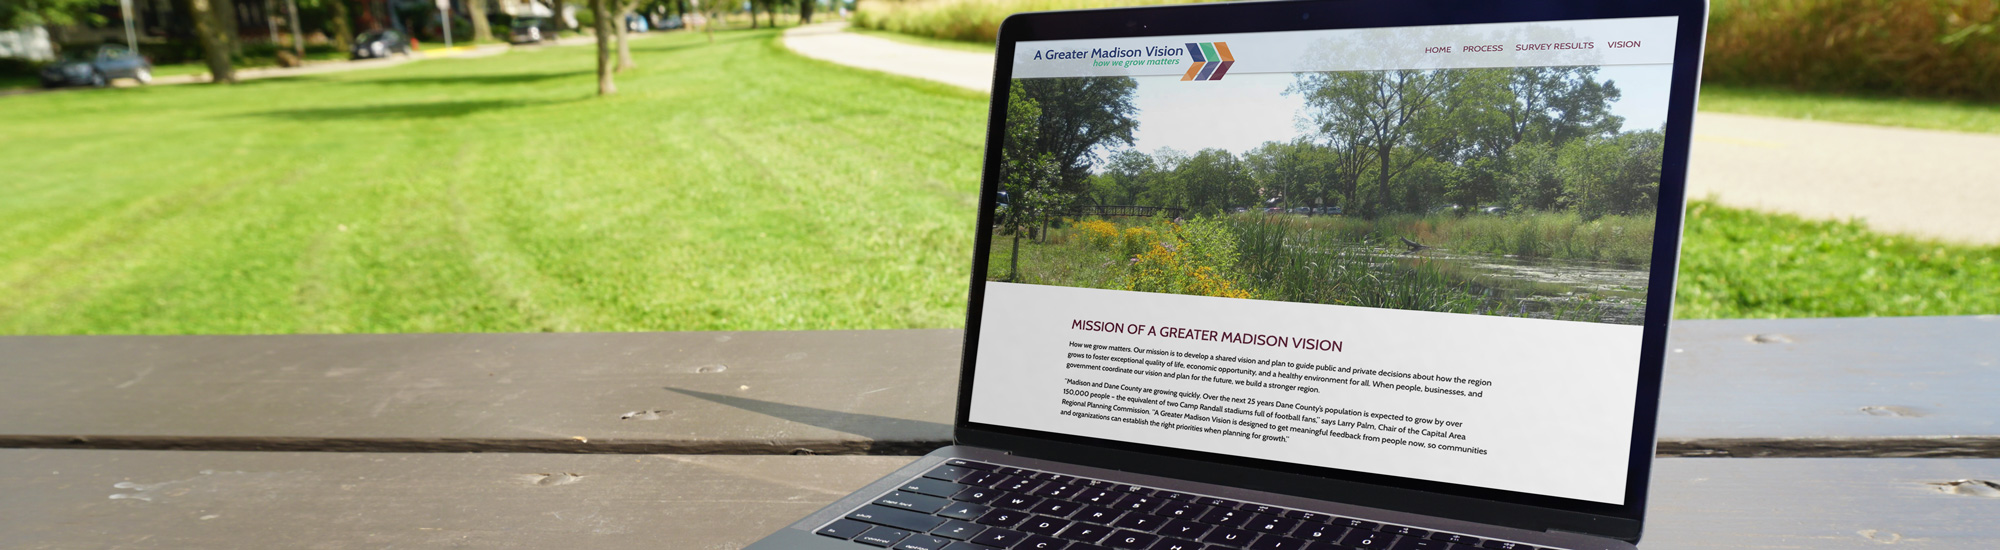 Photo of A Greater Madison Vision website on laptop on picnic table in park